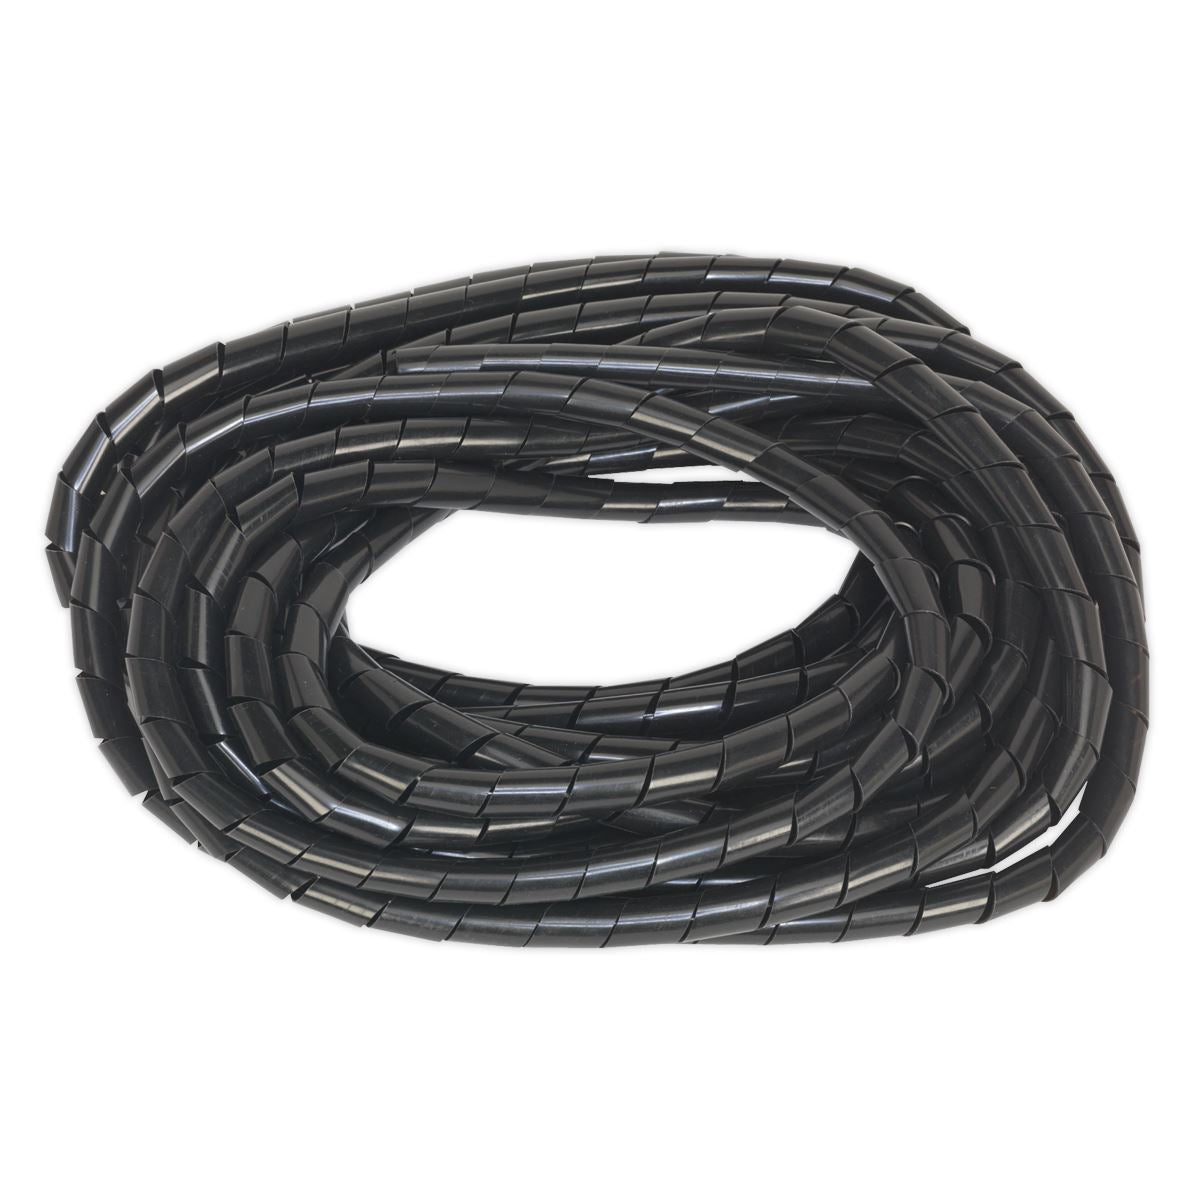 Sealey Spiral Wrap Cable Sleeving Ø14-28mm 10m